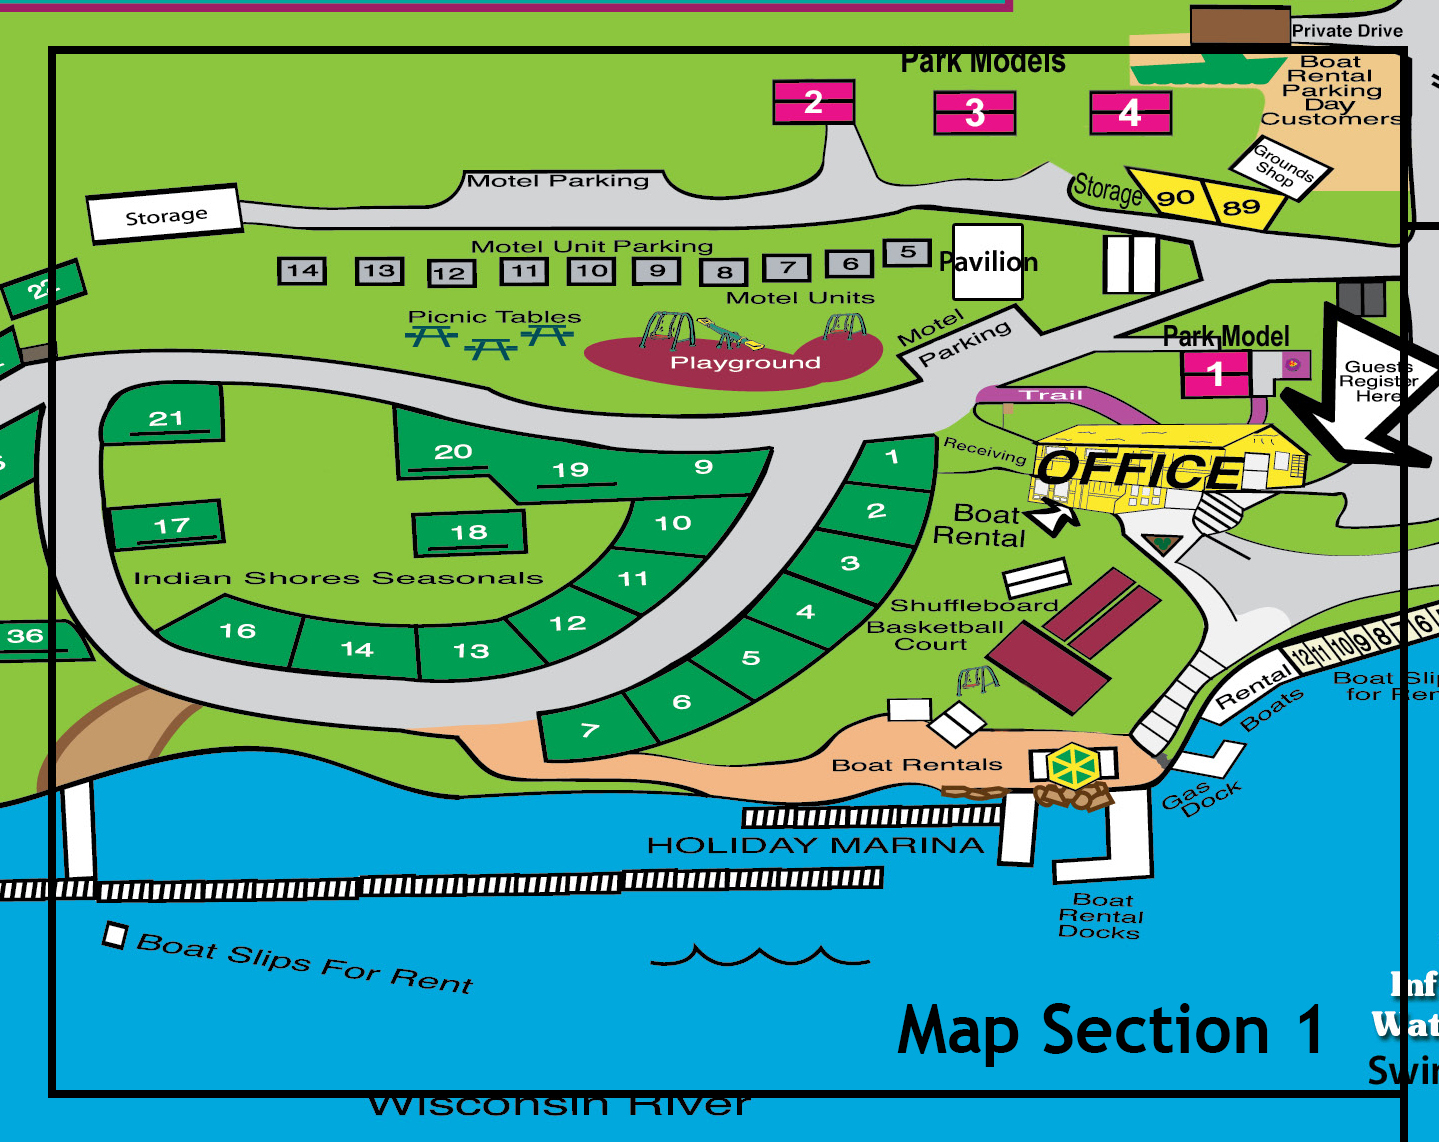 Resort Map Section 1